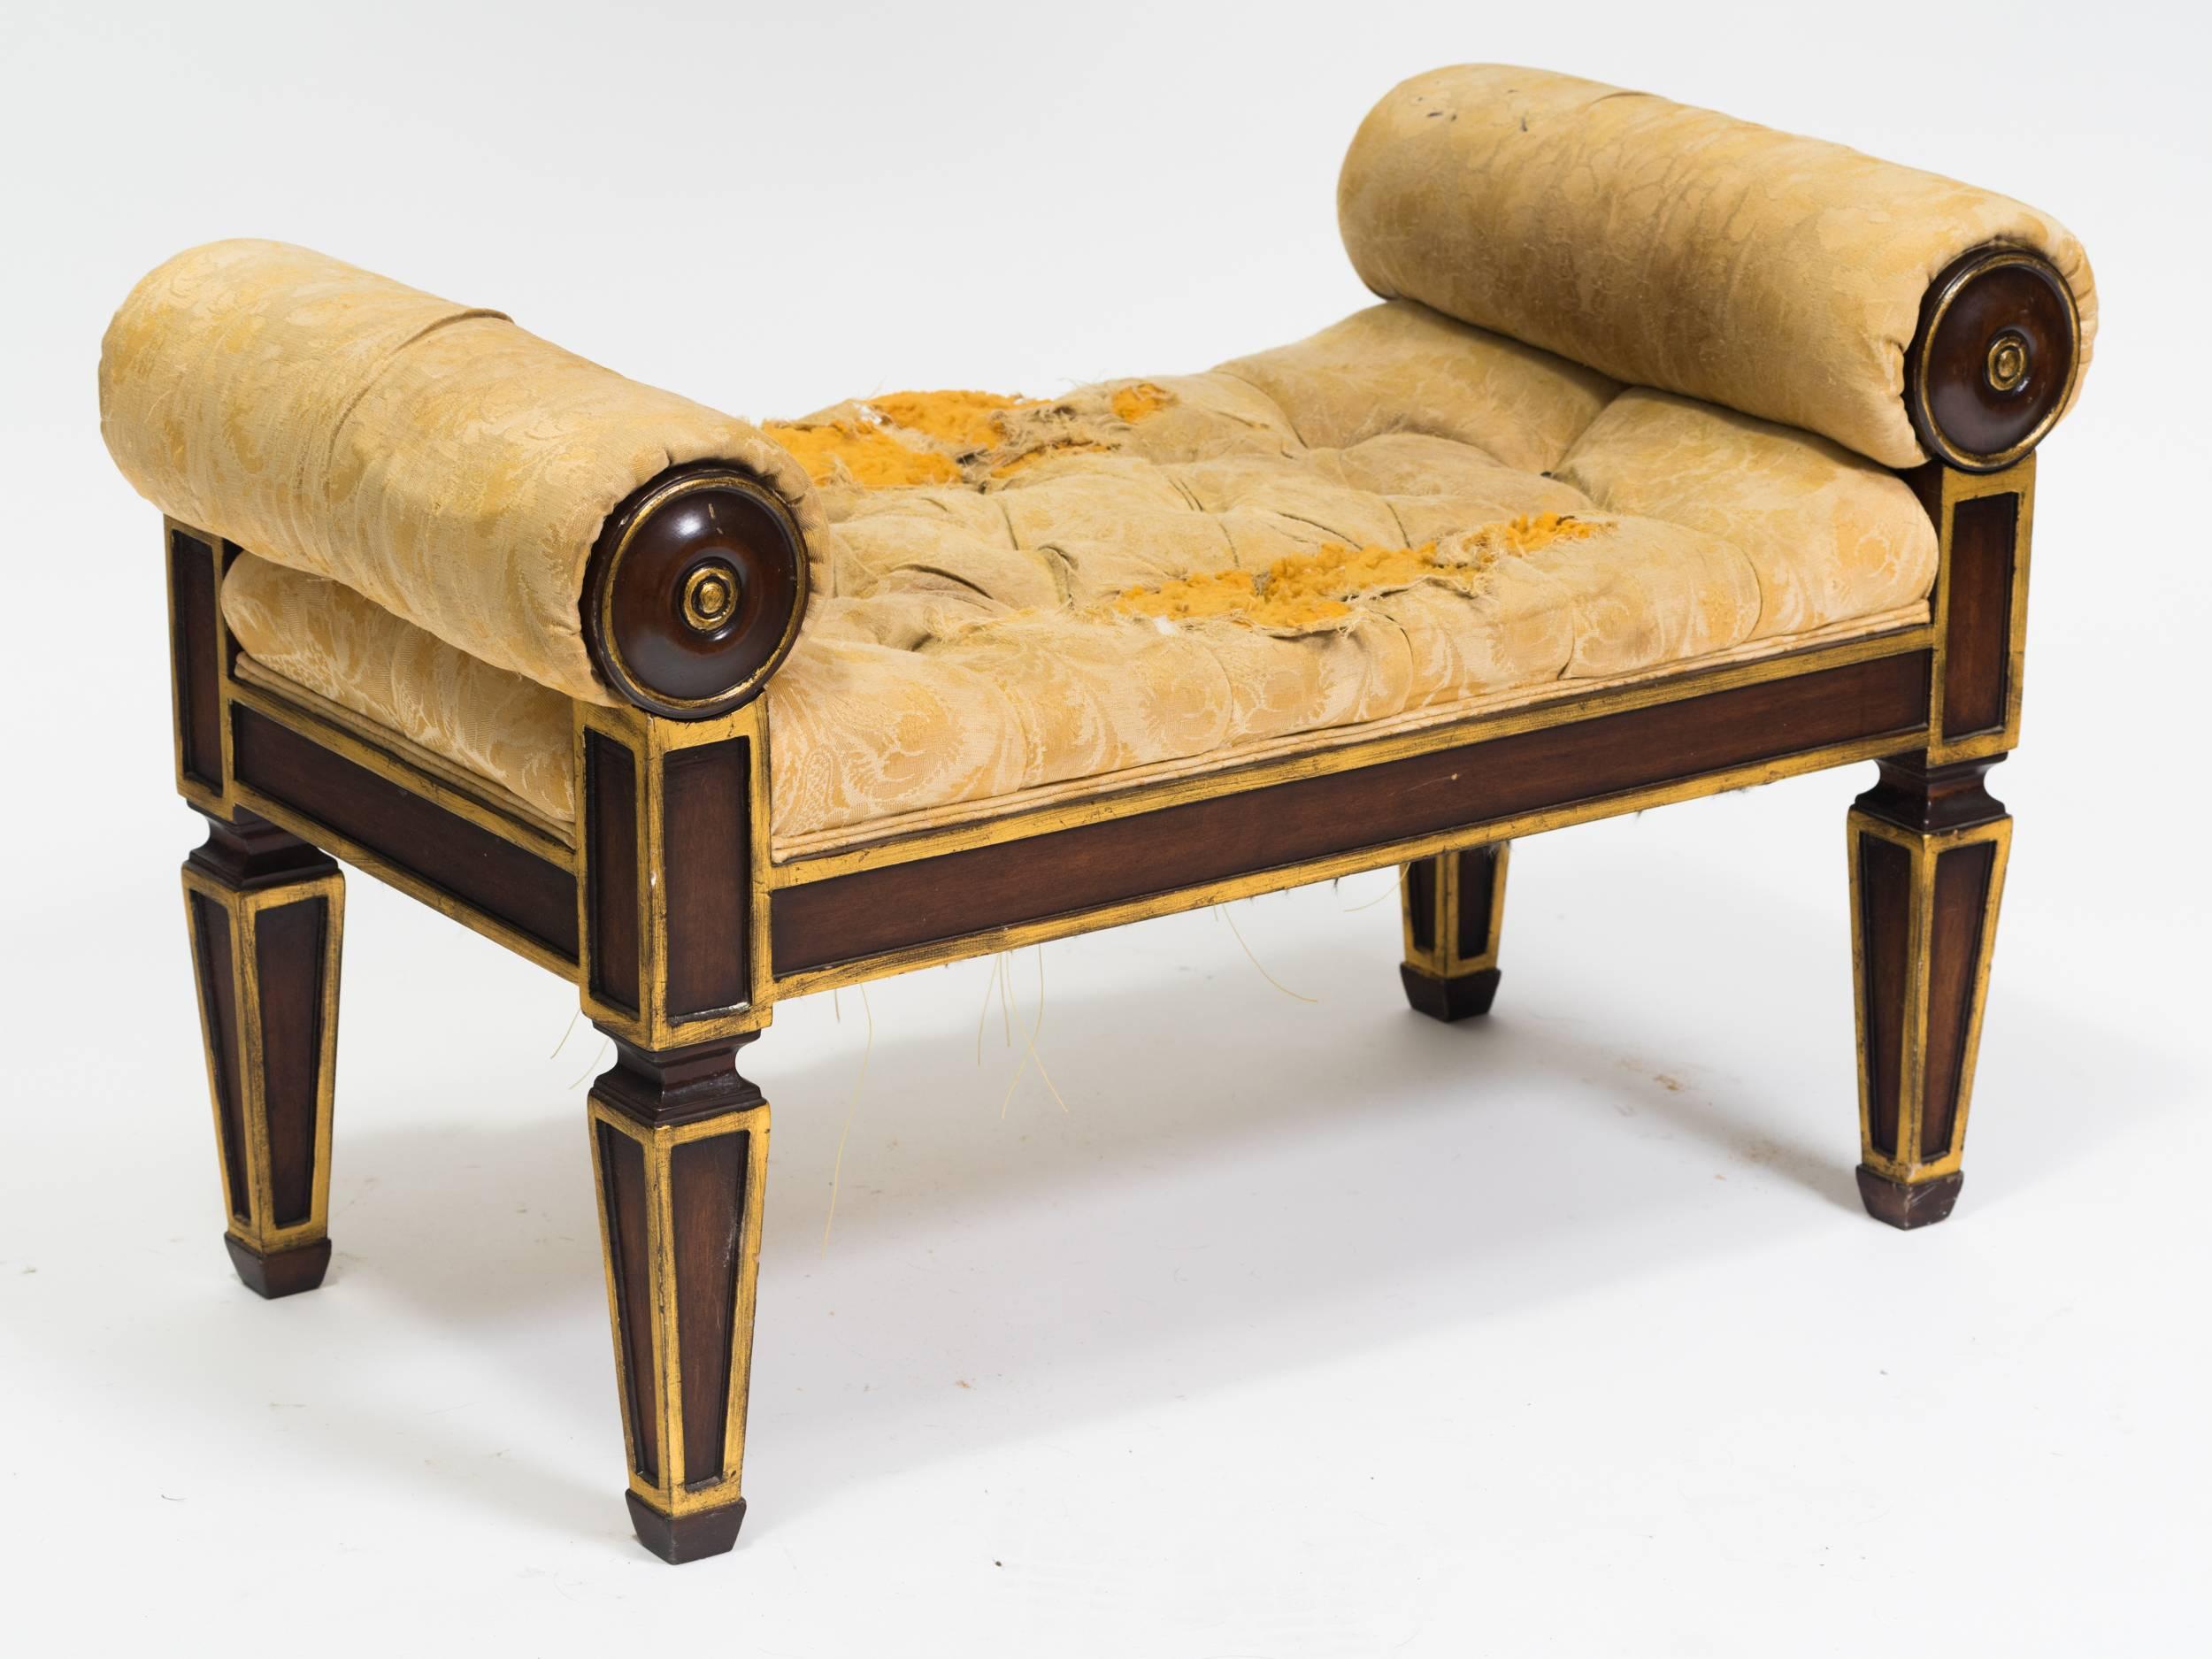 A 1920s upholstered bench.